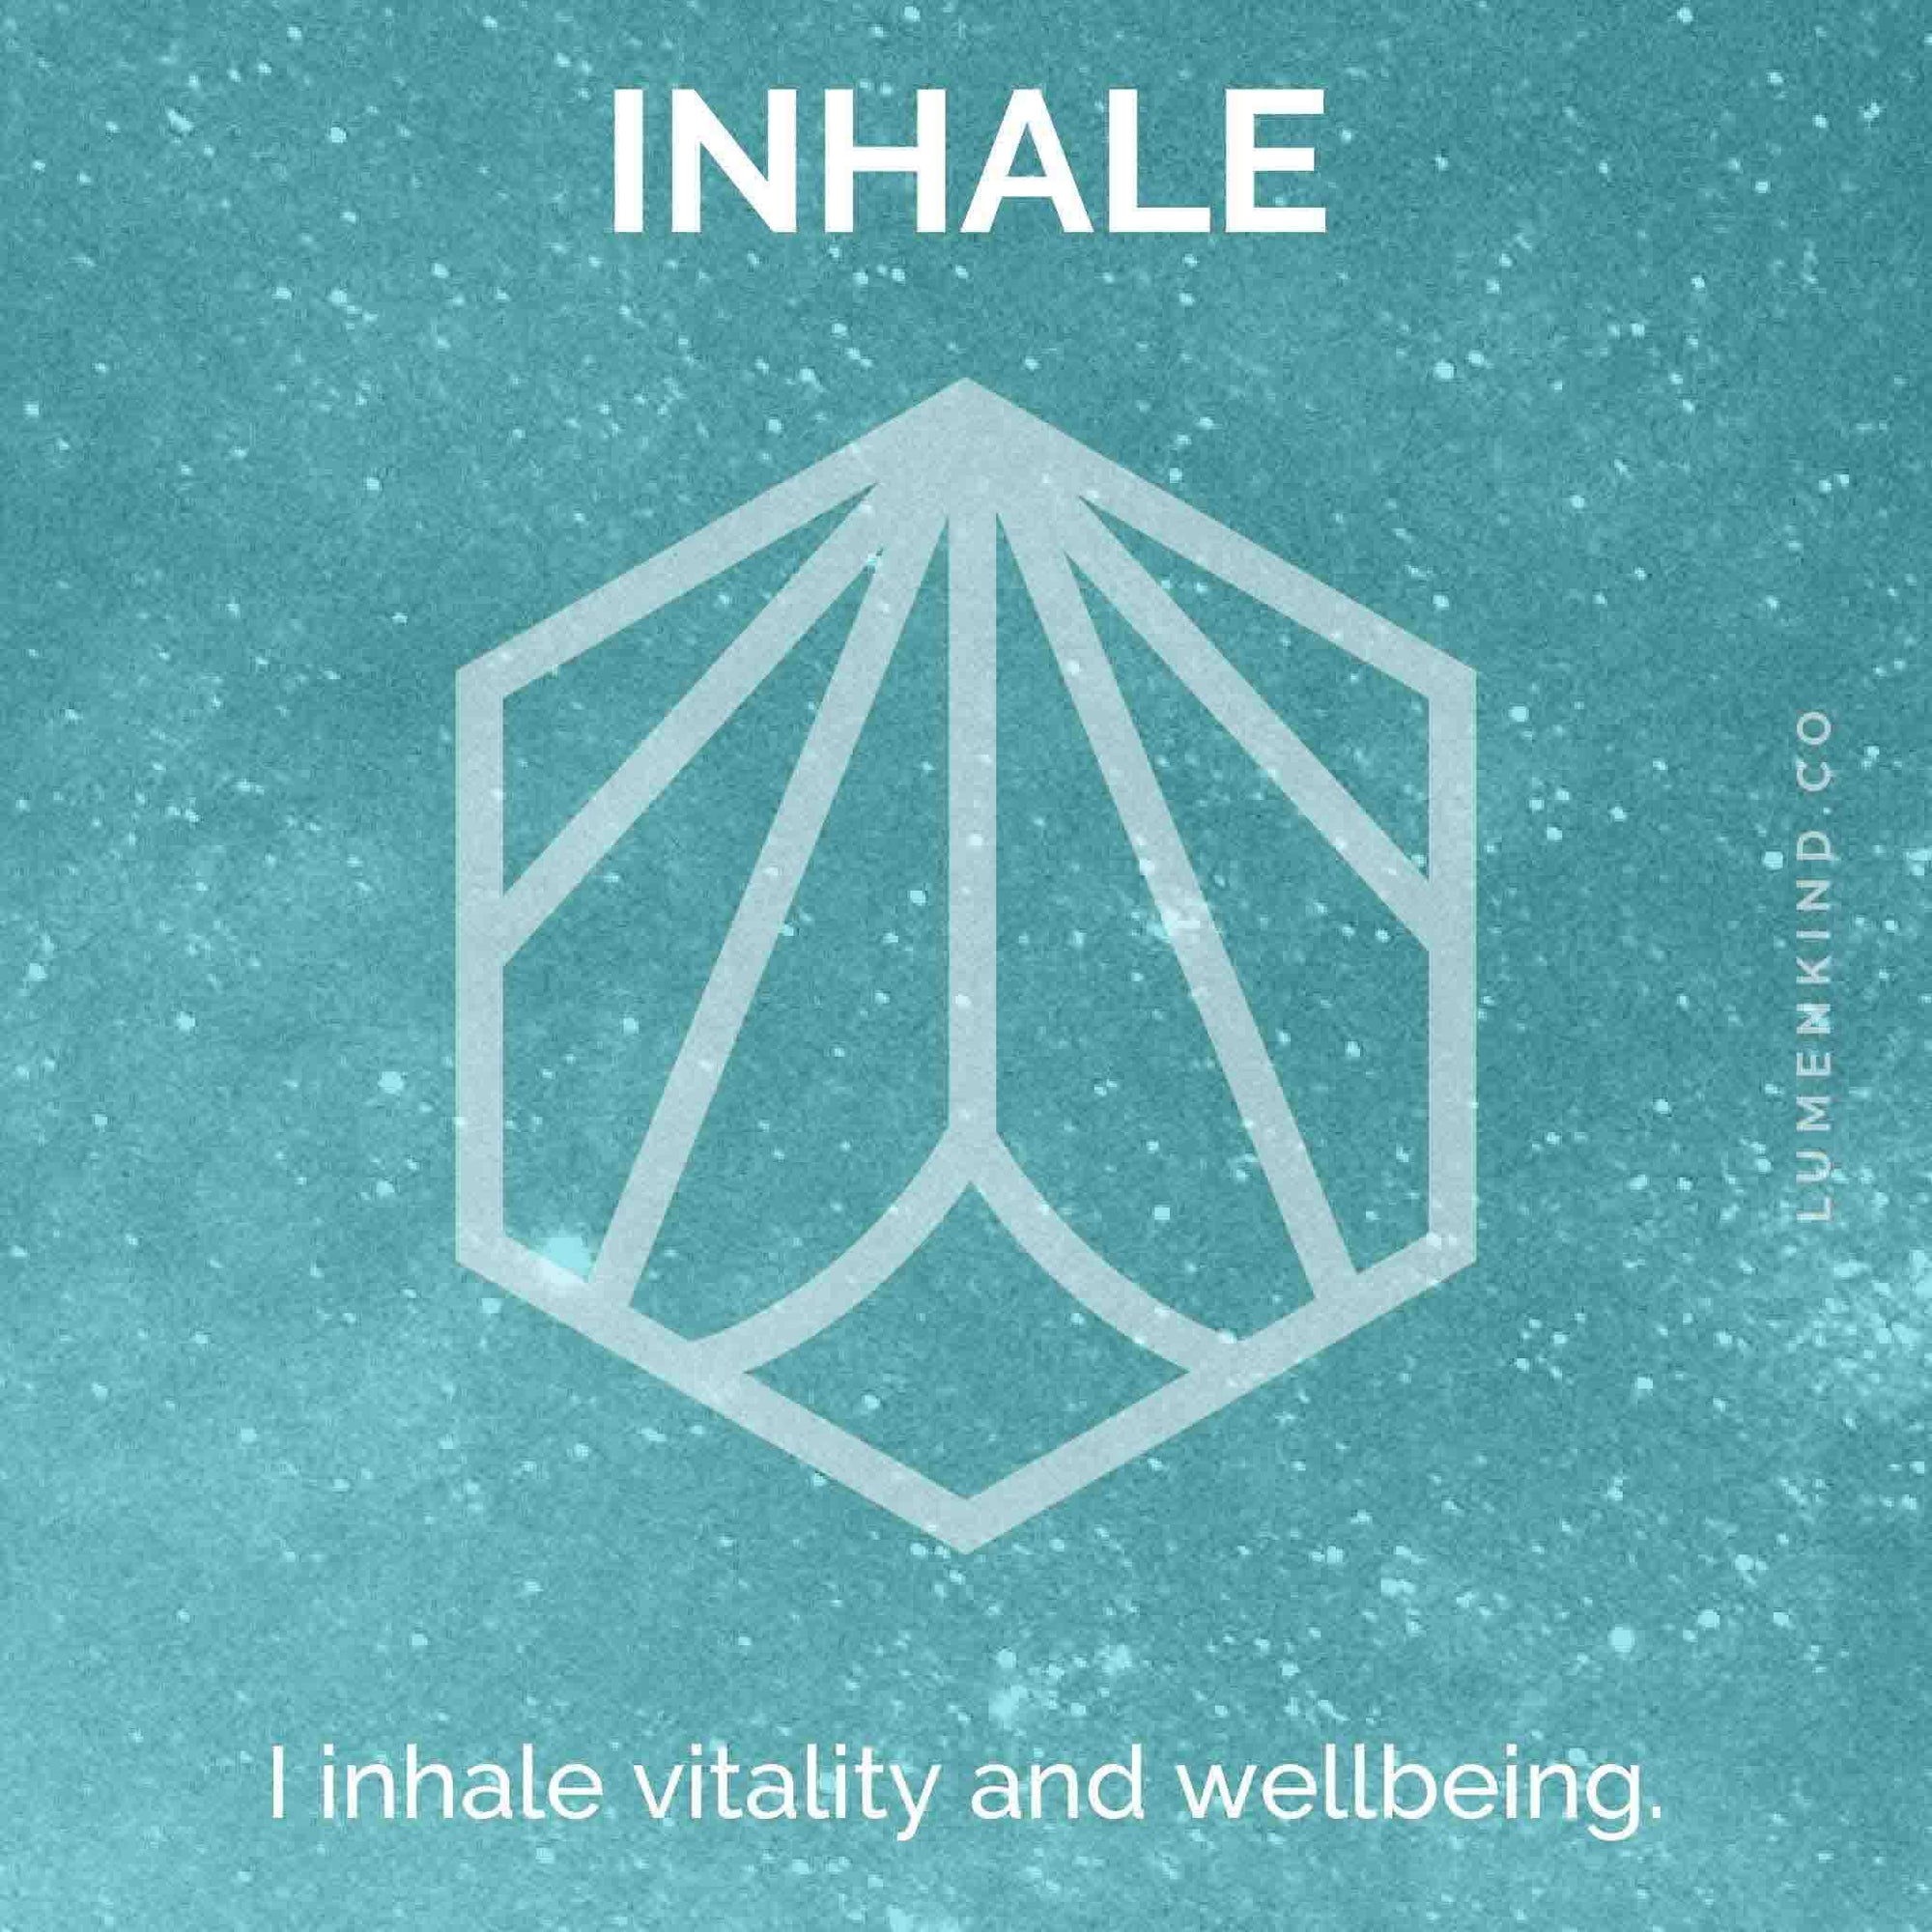 The suggested intention is INHALE. I inhale vitality and wellbeing.